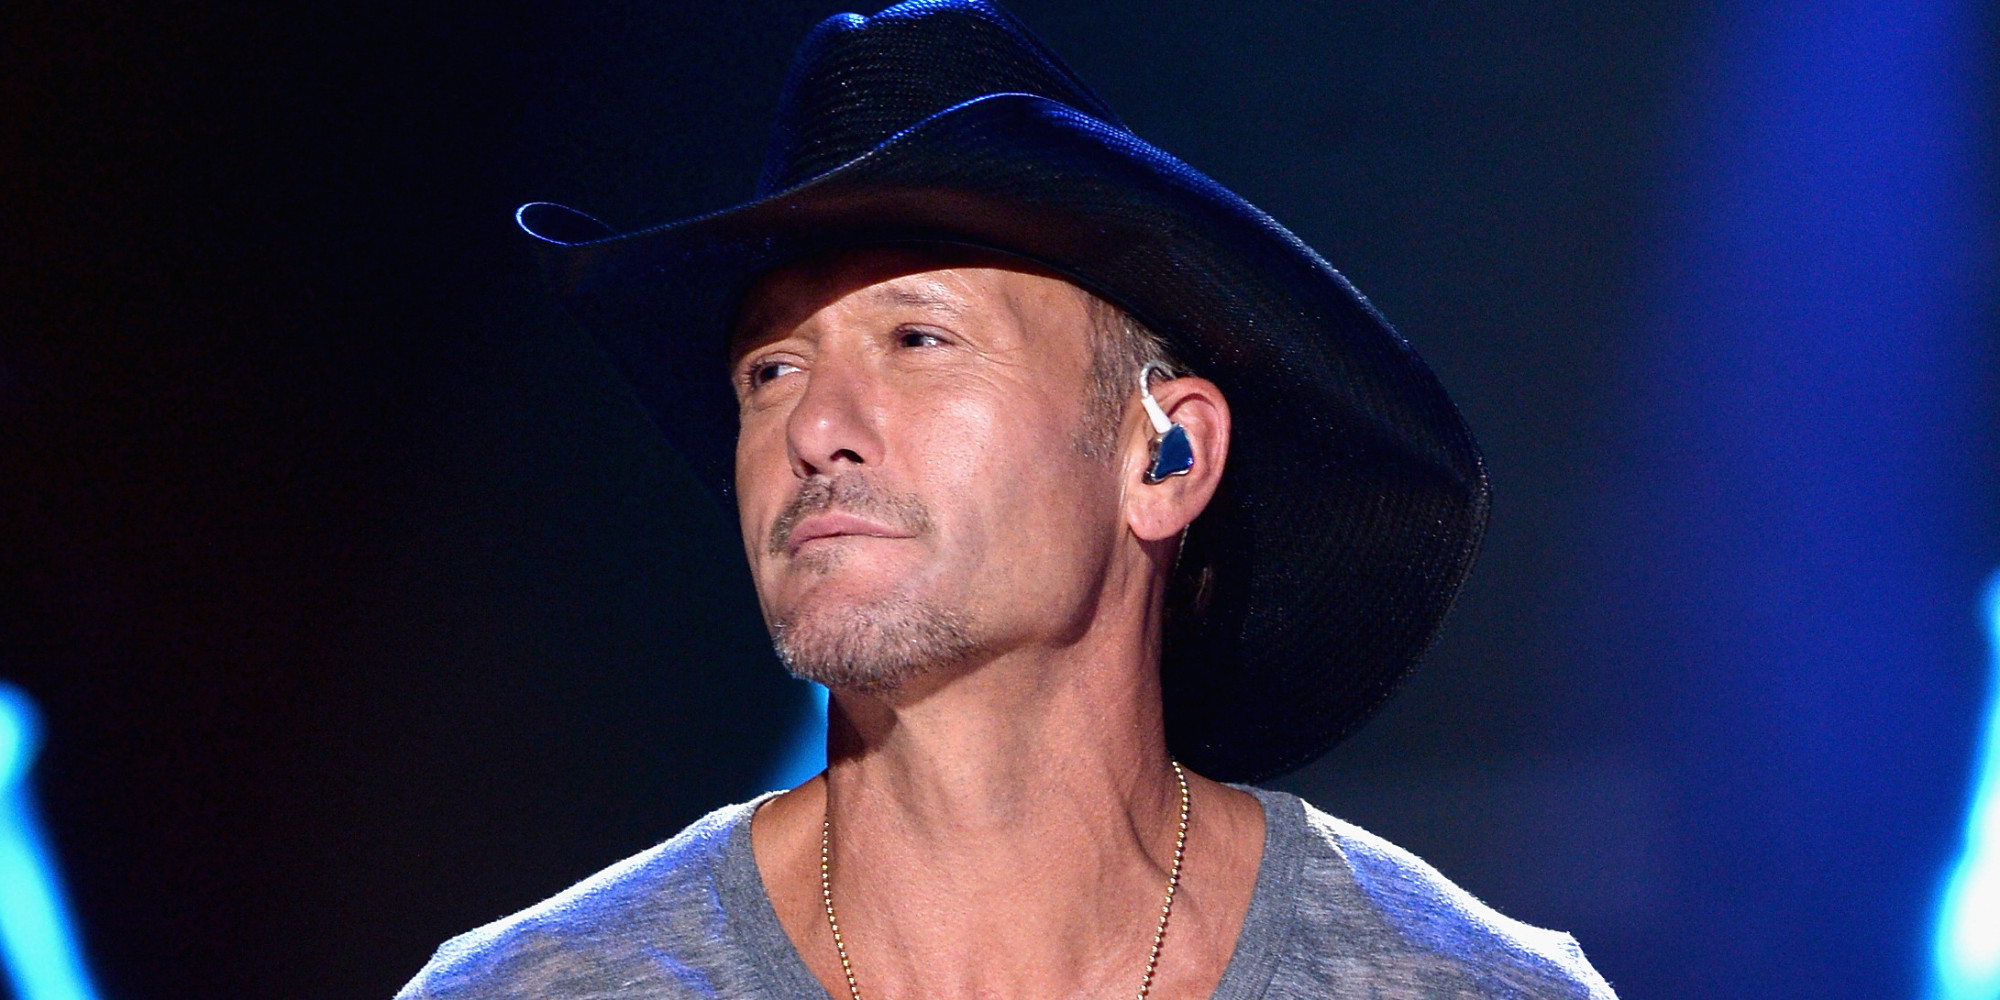 Tim McGraw Opens Up About Past Drug And Alcohol Addictions